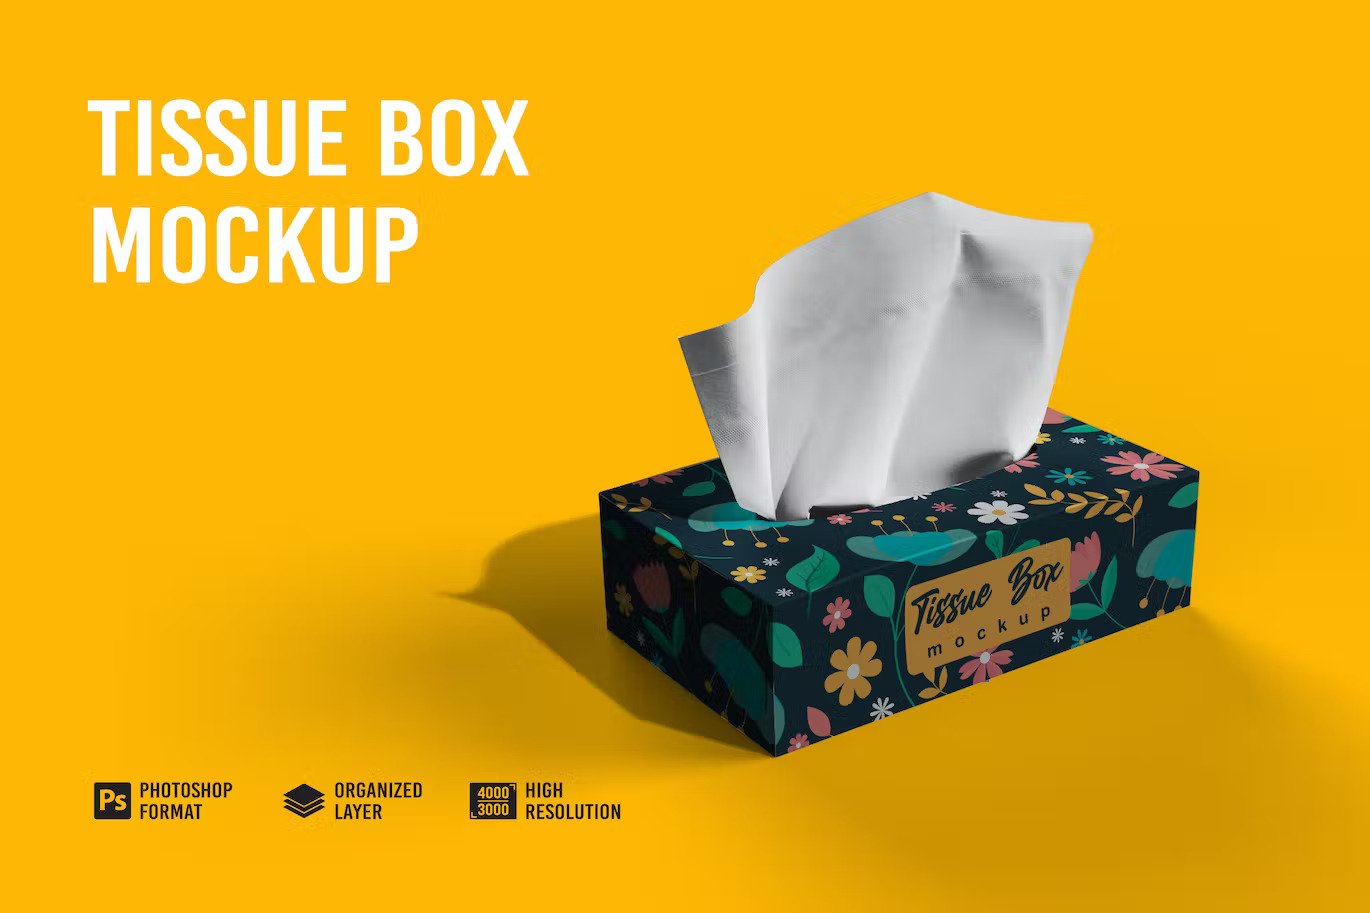 A tissue box mockup on yellow background